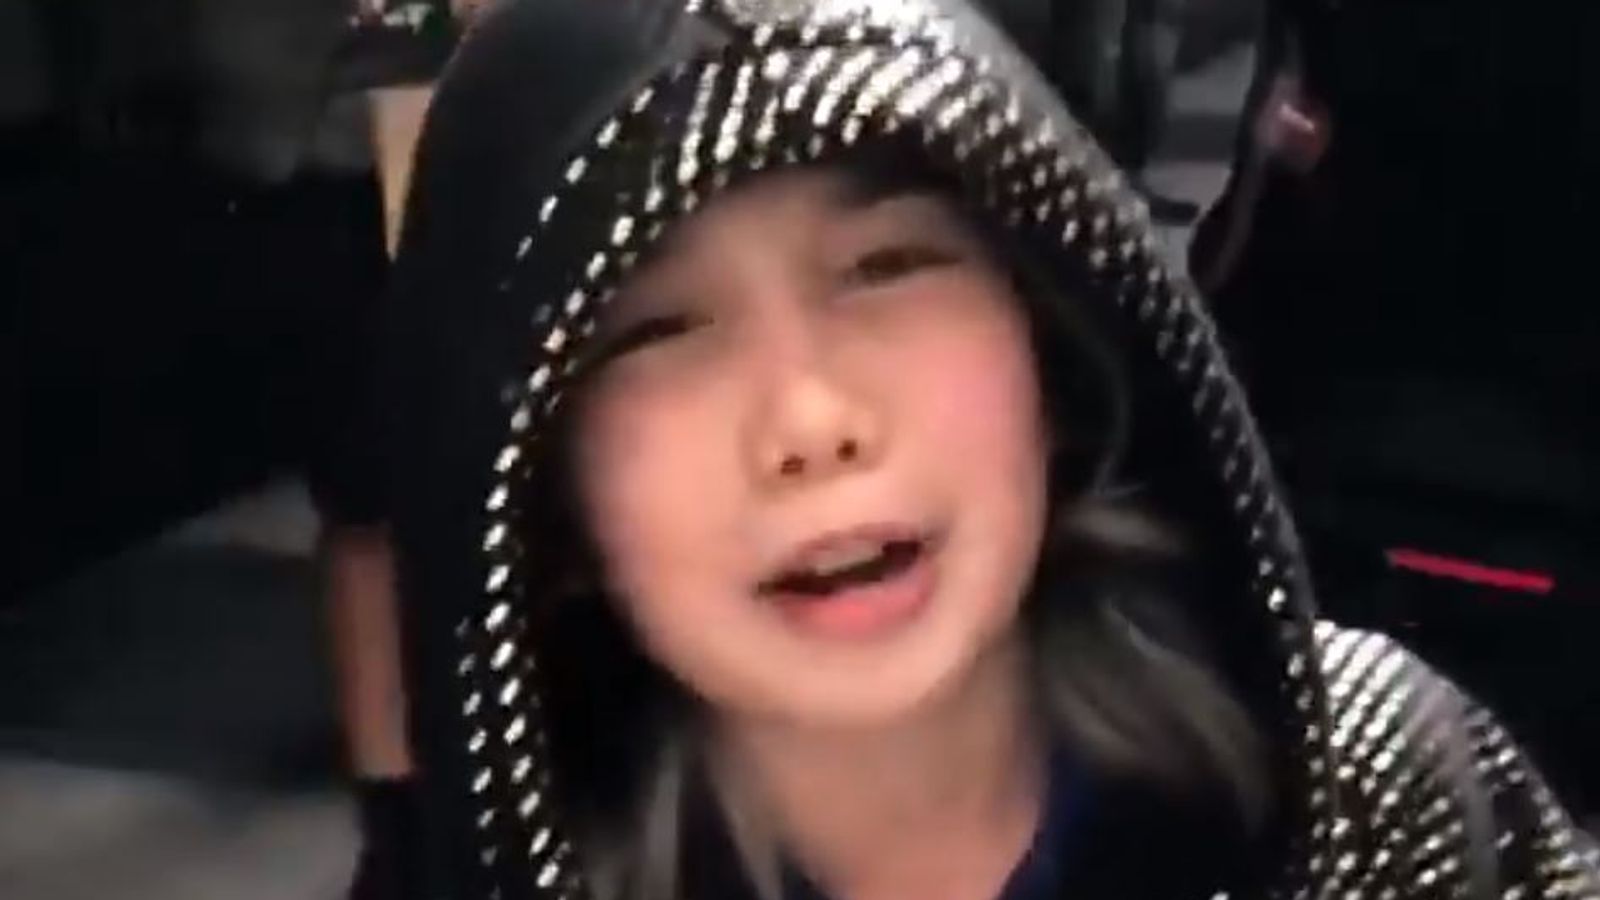 Lil Tay: Child rapper says she and her brother are safe and alive after Instagram statement said they had both died